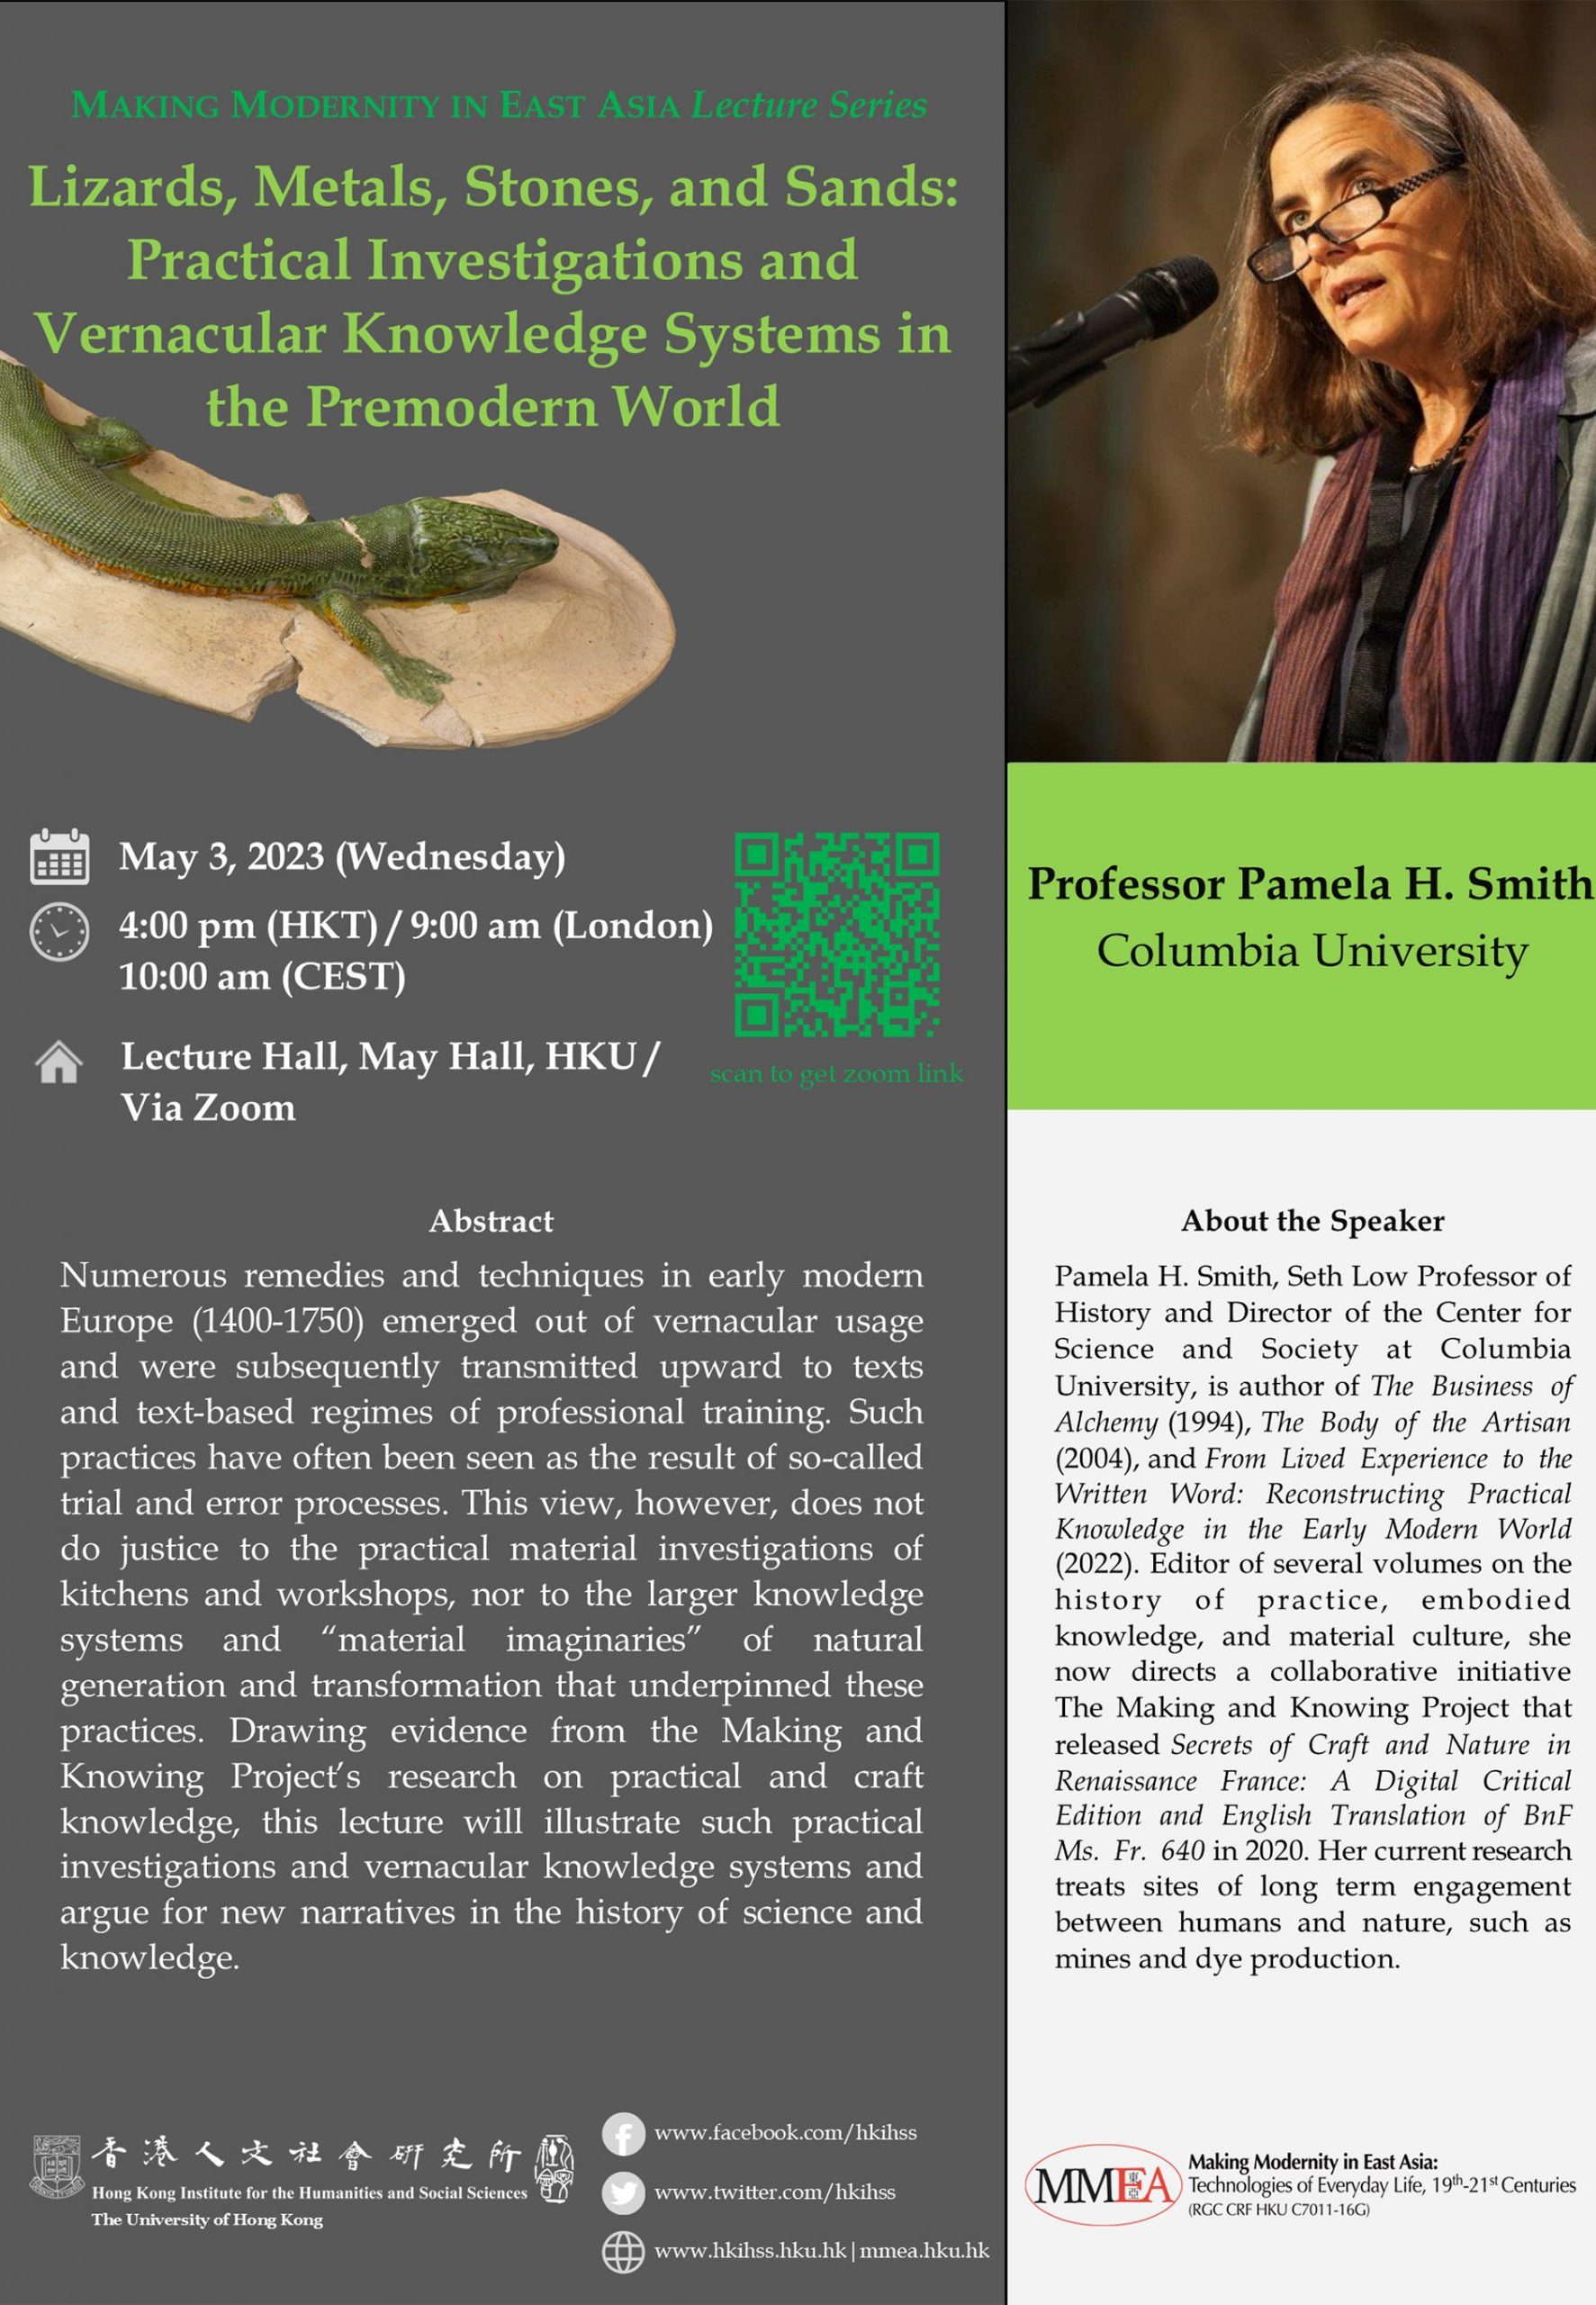 MMEA Lecture Series “Lizards, Metals, Stones, and Sands: Practical Investigations and Vernacular Knowledge Systems in the Premodern World” by Professor Pamela H. Smith (May 3, 2023)